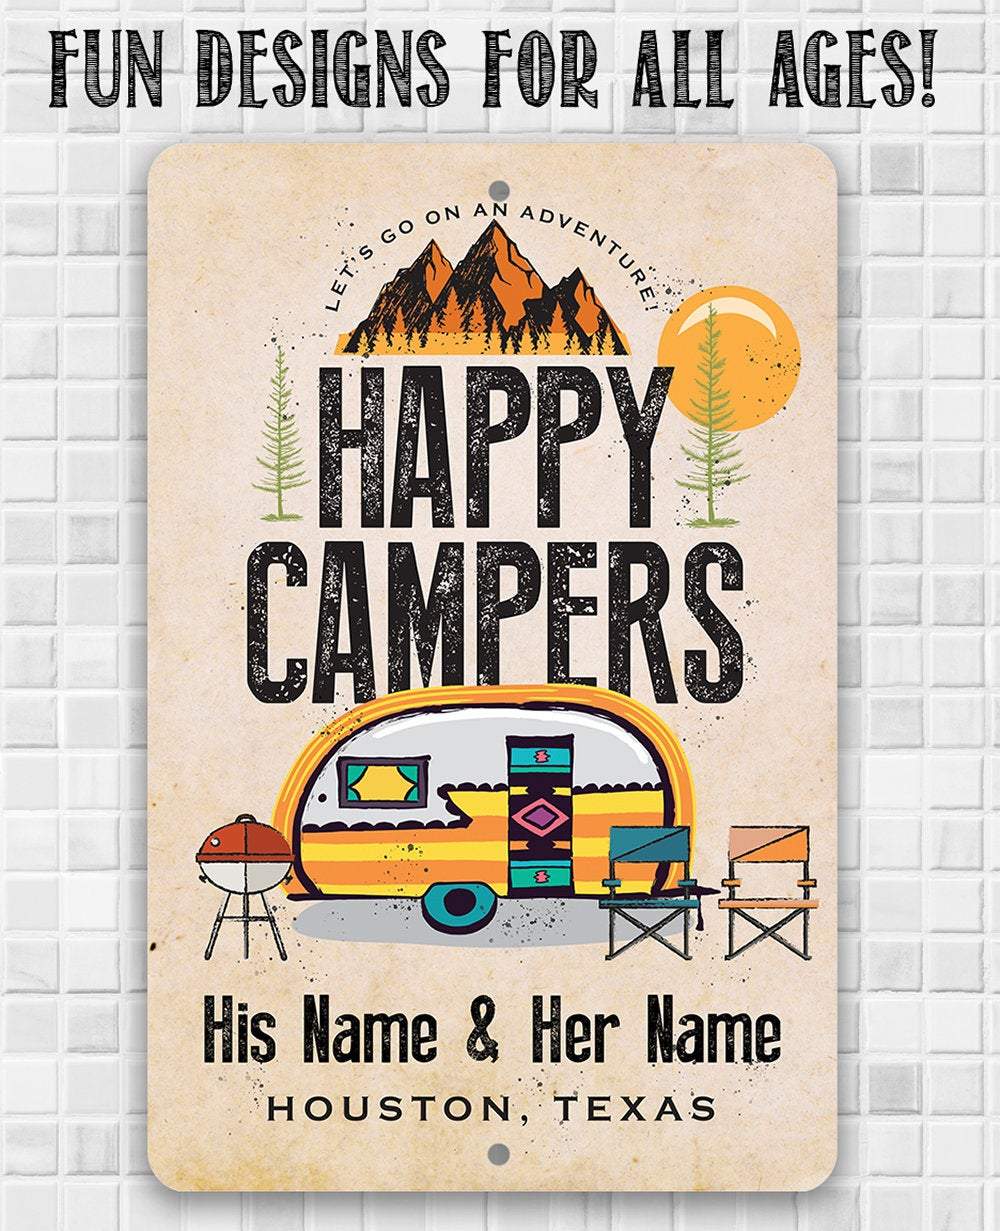 Personalized - Happy Campers - Metal Sign | Lone Star Art.